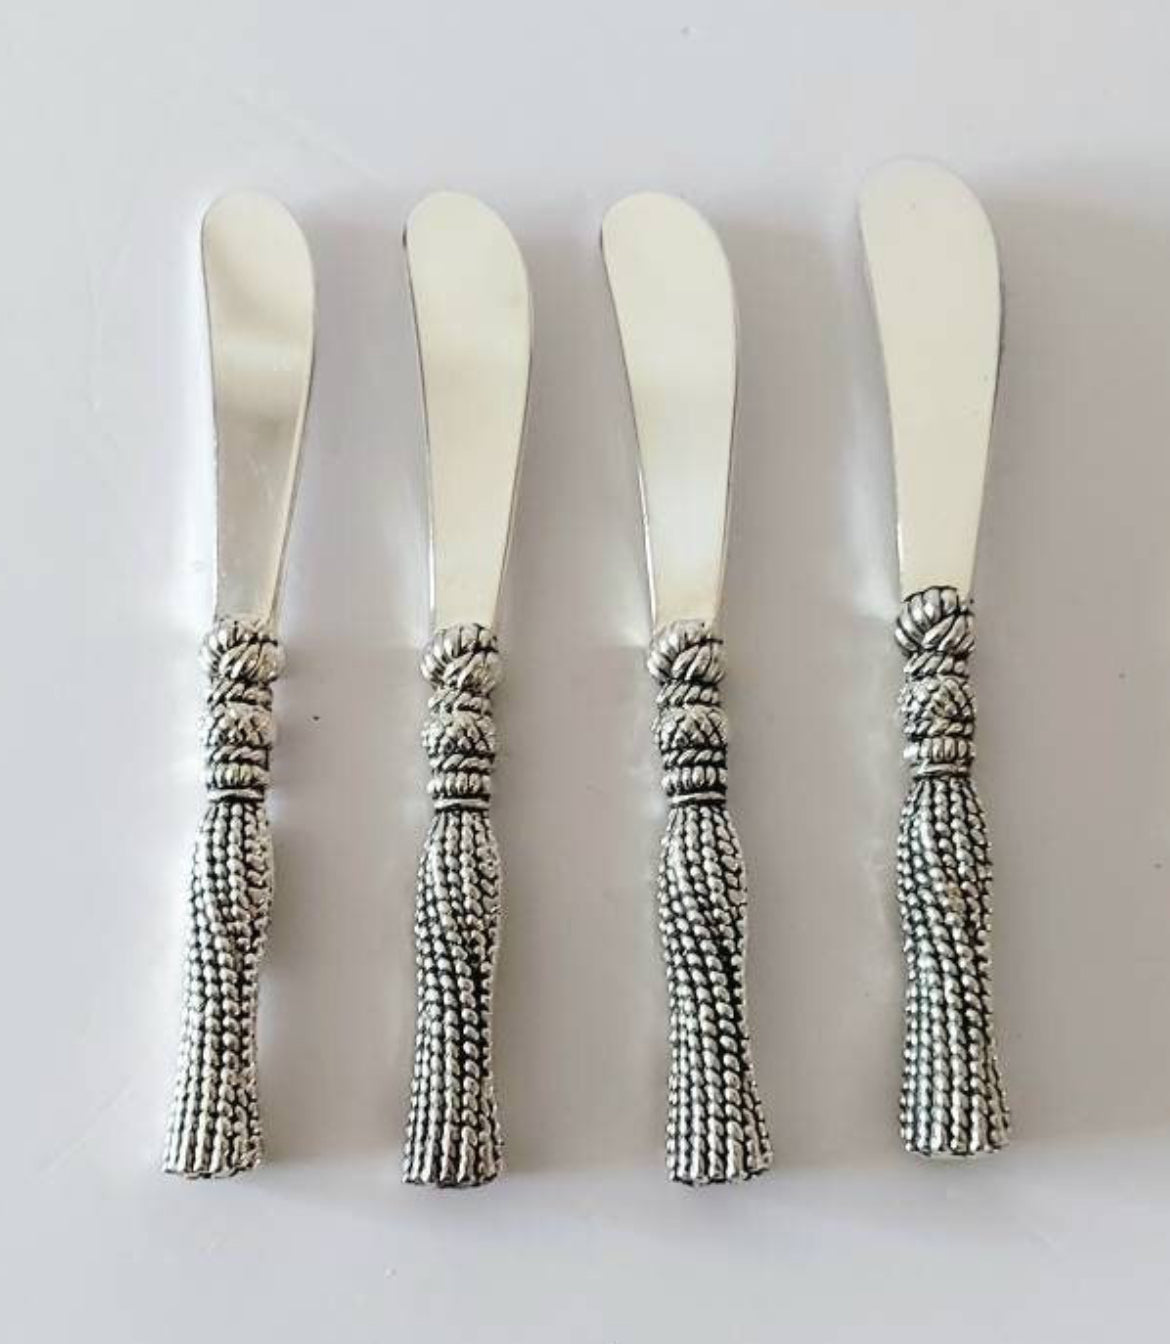 Spectacular Silver Plated “Robe” Butter Knife